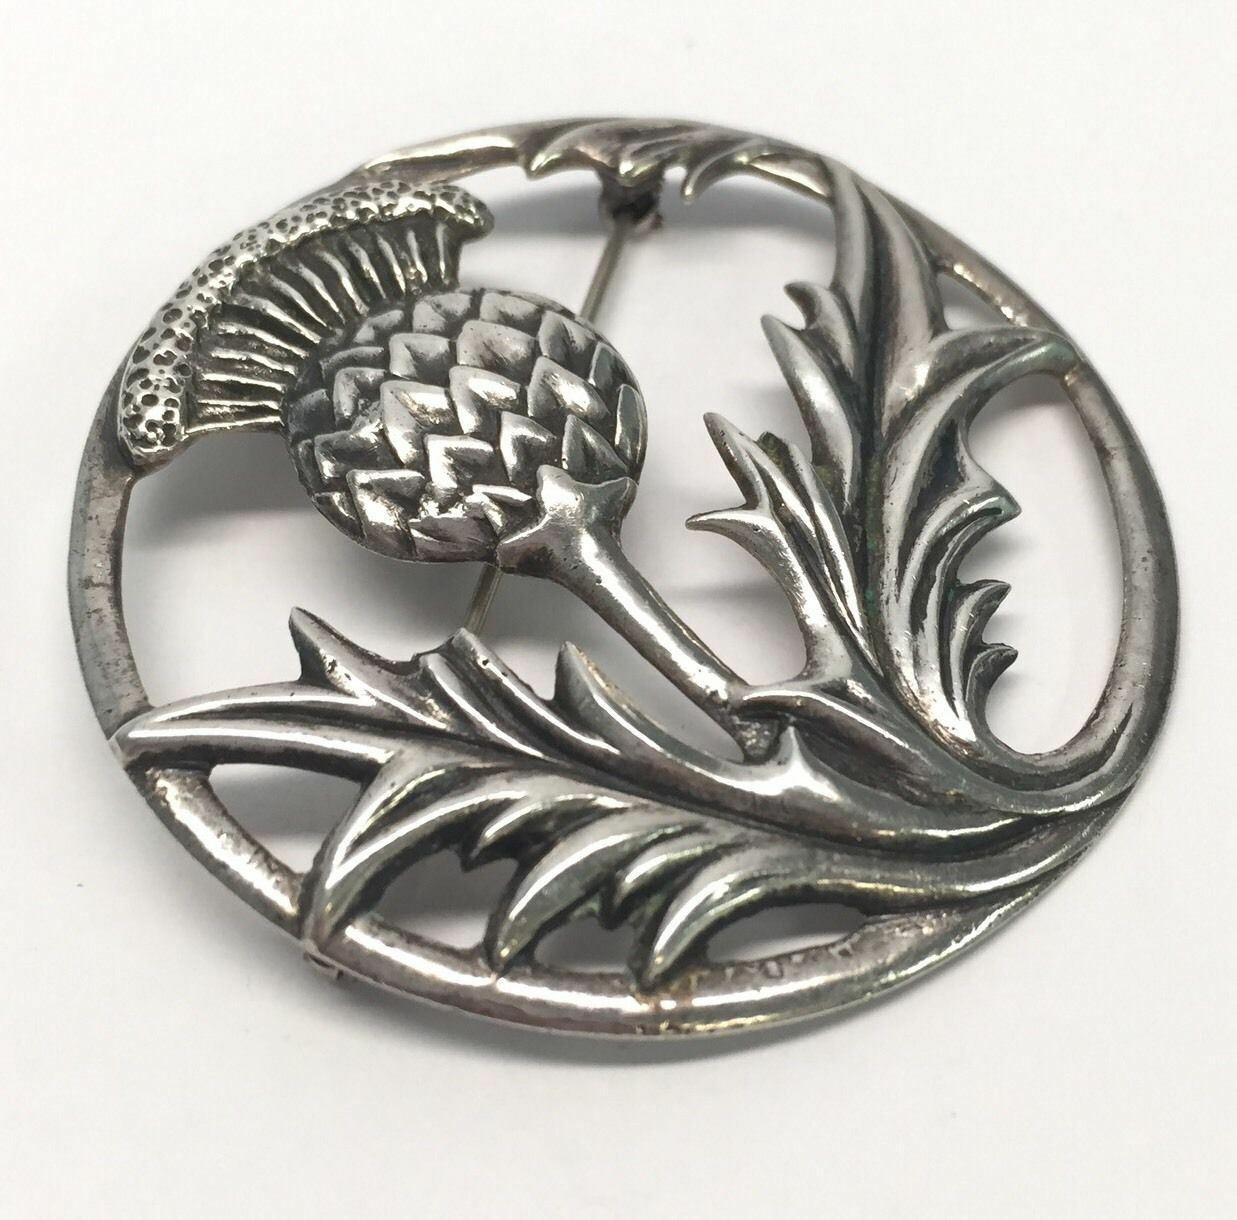 Danecraft sterling silver large Scottish thistle circle pin/brooch.

Marked: DANECRAFT REG. U.S. PAT. OFF. STERLING.

Weight: 13.1dwt, 20.3g.

Measures approx. 2 1/8